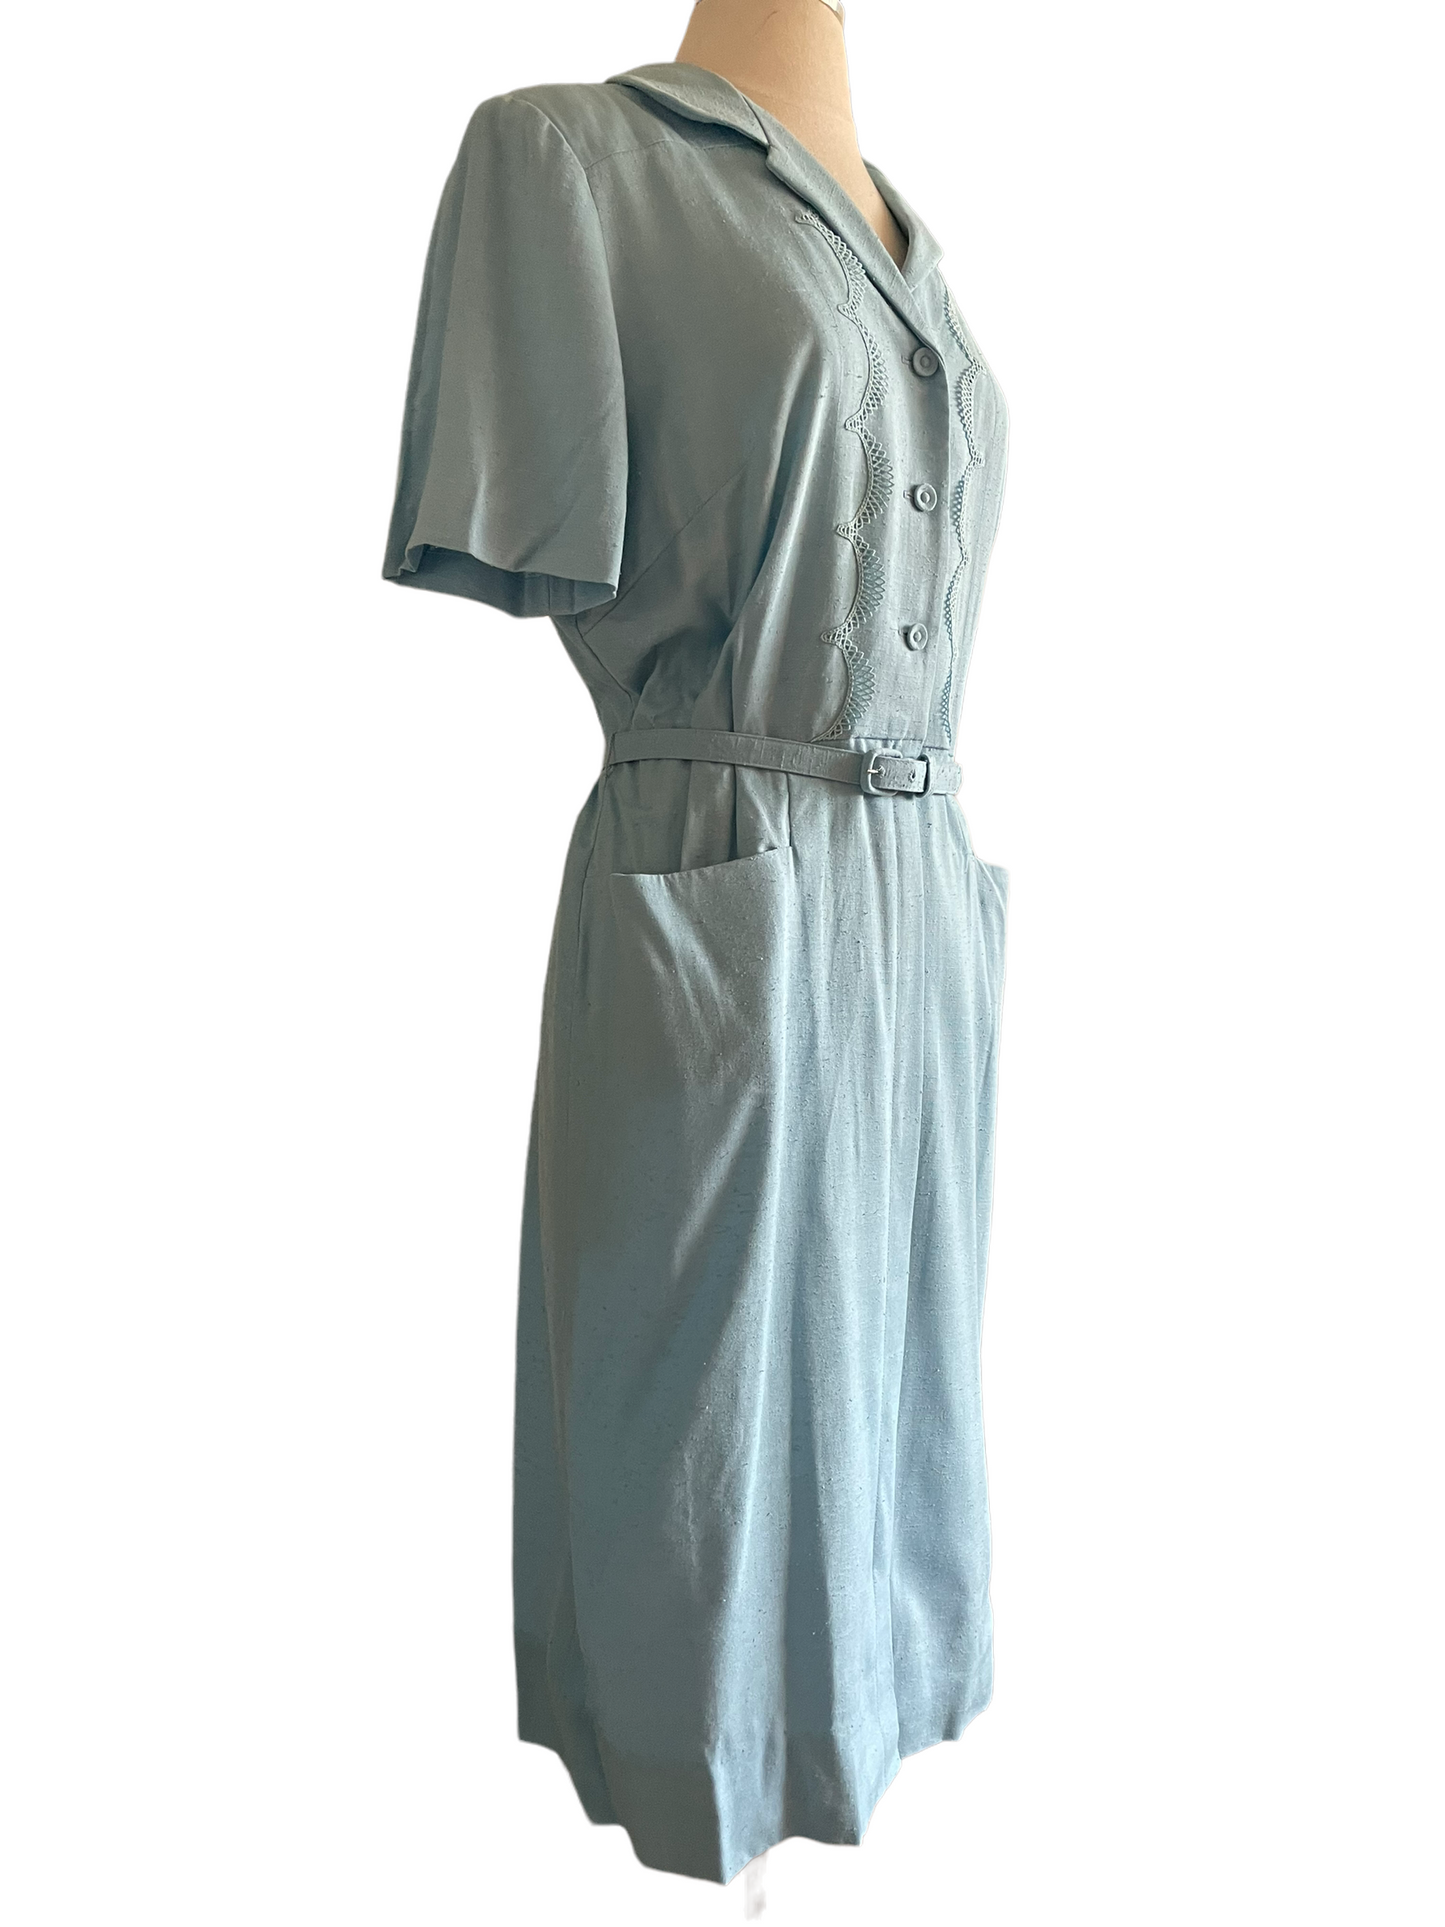 Vintage 1950s Deadstock Lordleigh Light Blue Silk and Rayon Dress SZ M|  Barn Owl Vintage | Seattle Vintage Dresses Front right side view.